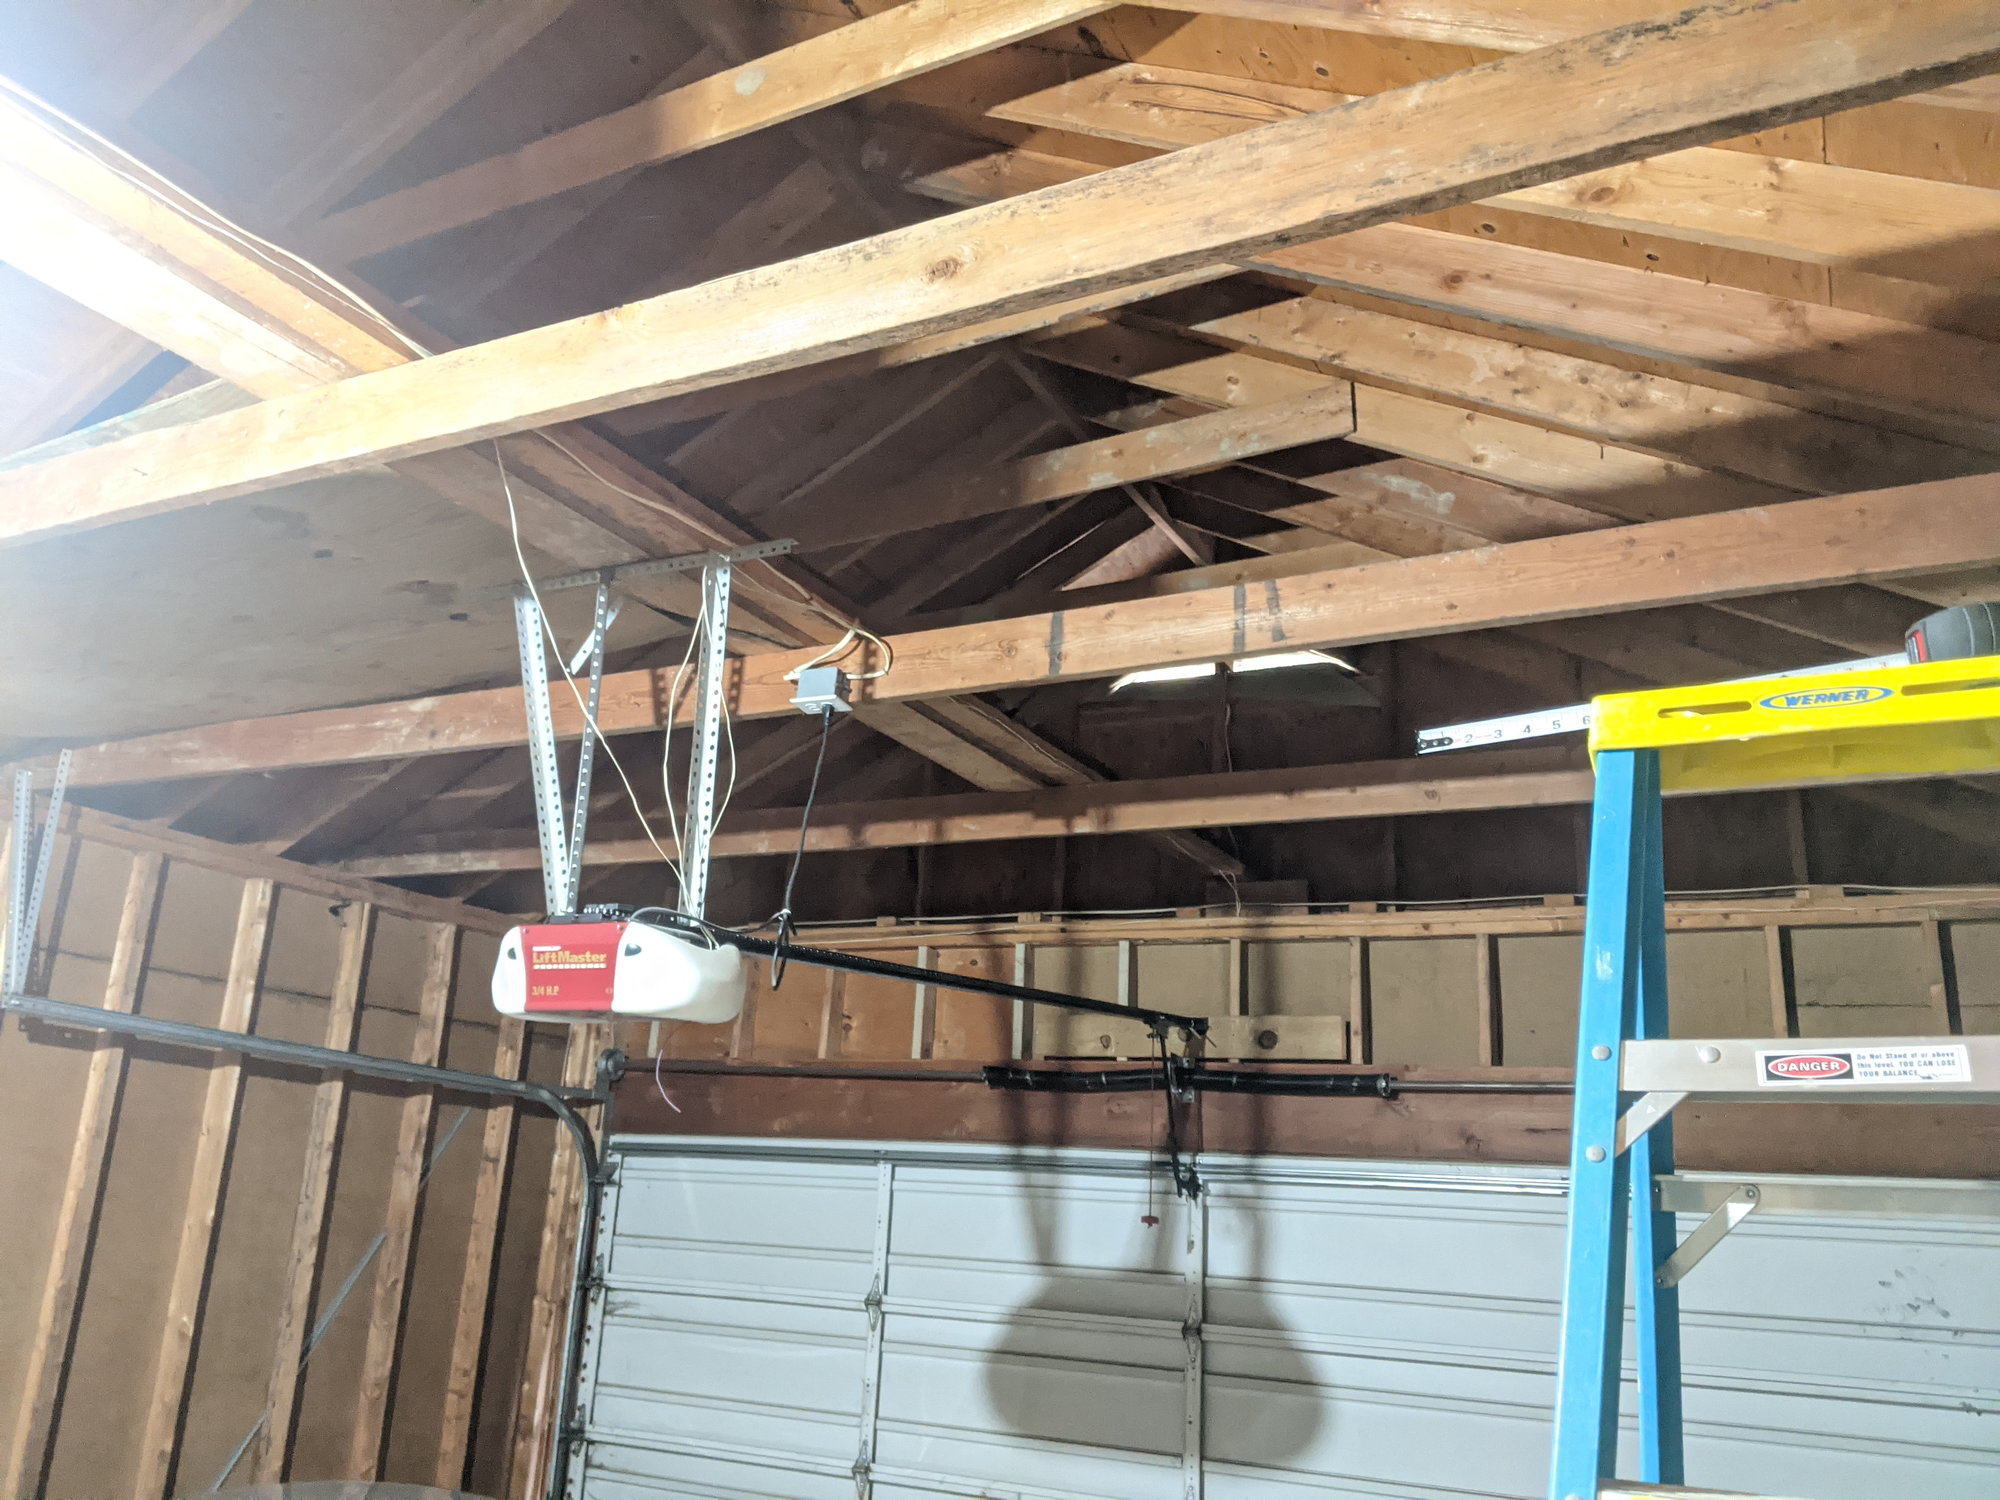 Garage Insulation Advice For A Newb, How To Insulate Garage Ceiling That Is Finished